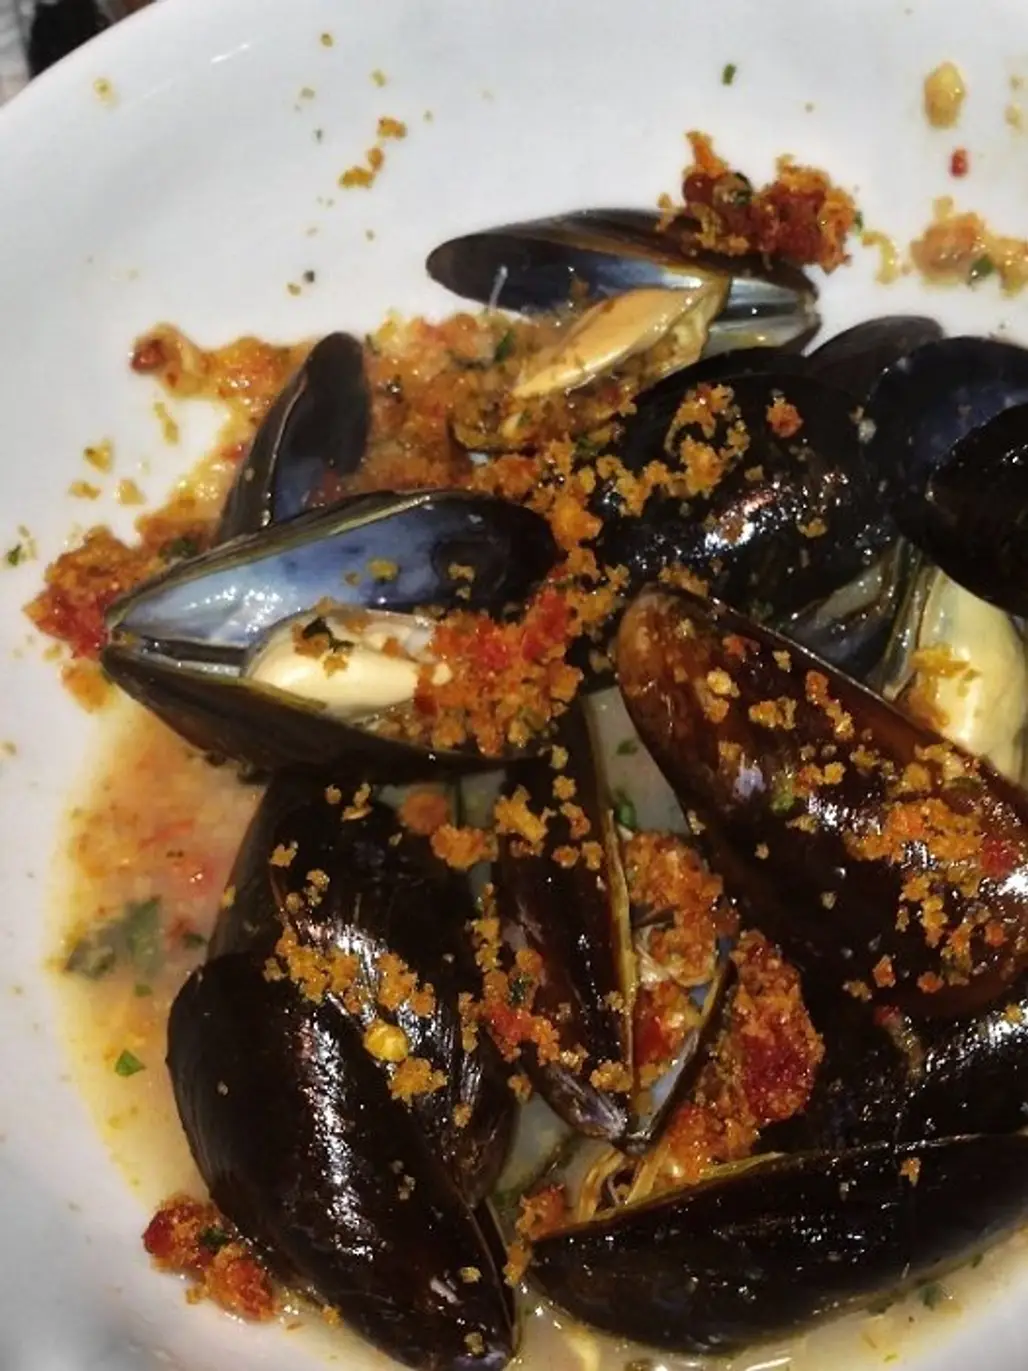 Ina Garten's Mussels and Basil Bread Crumbs